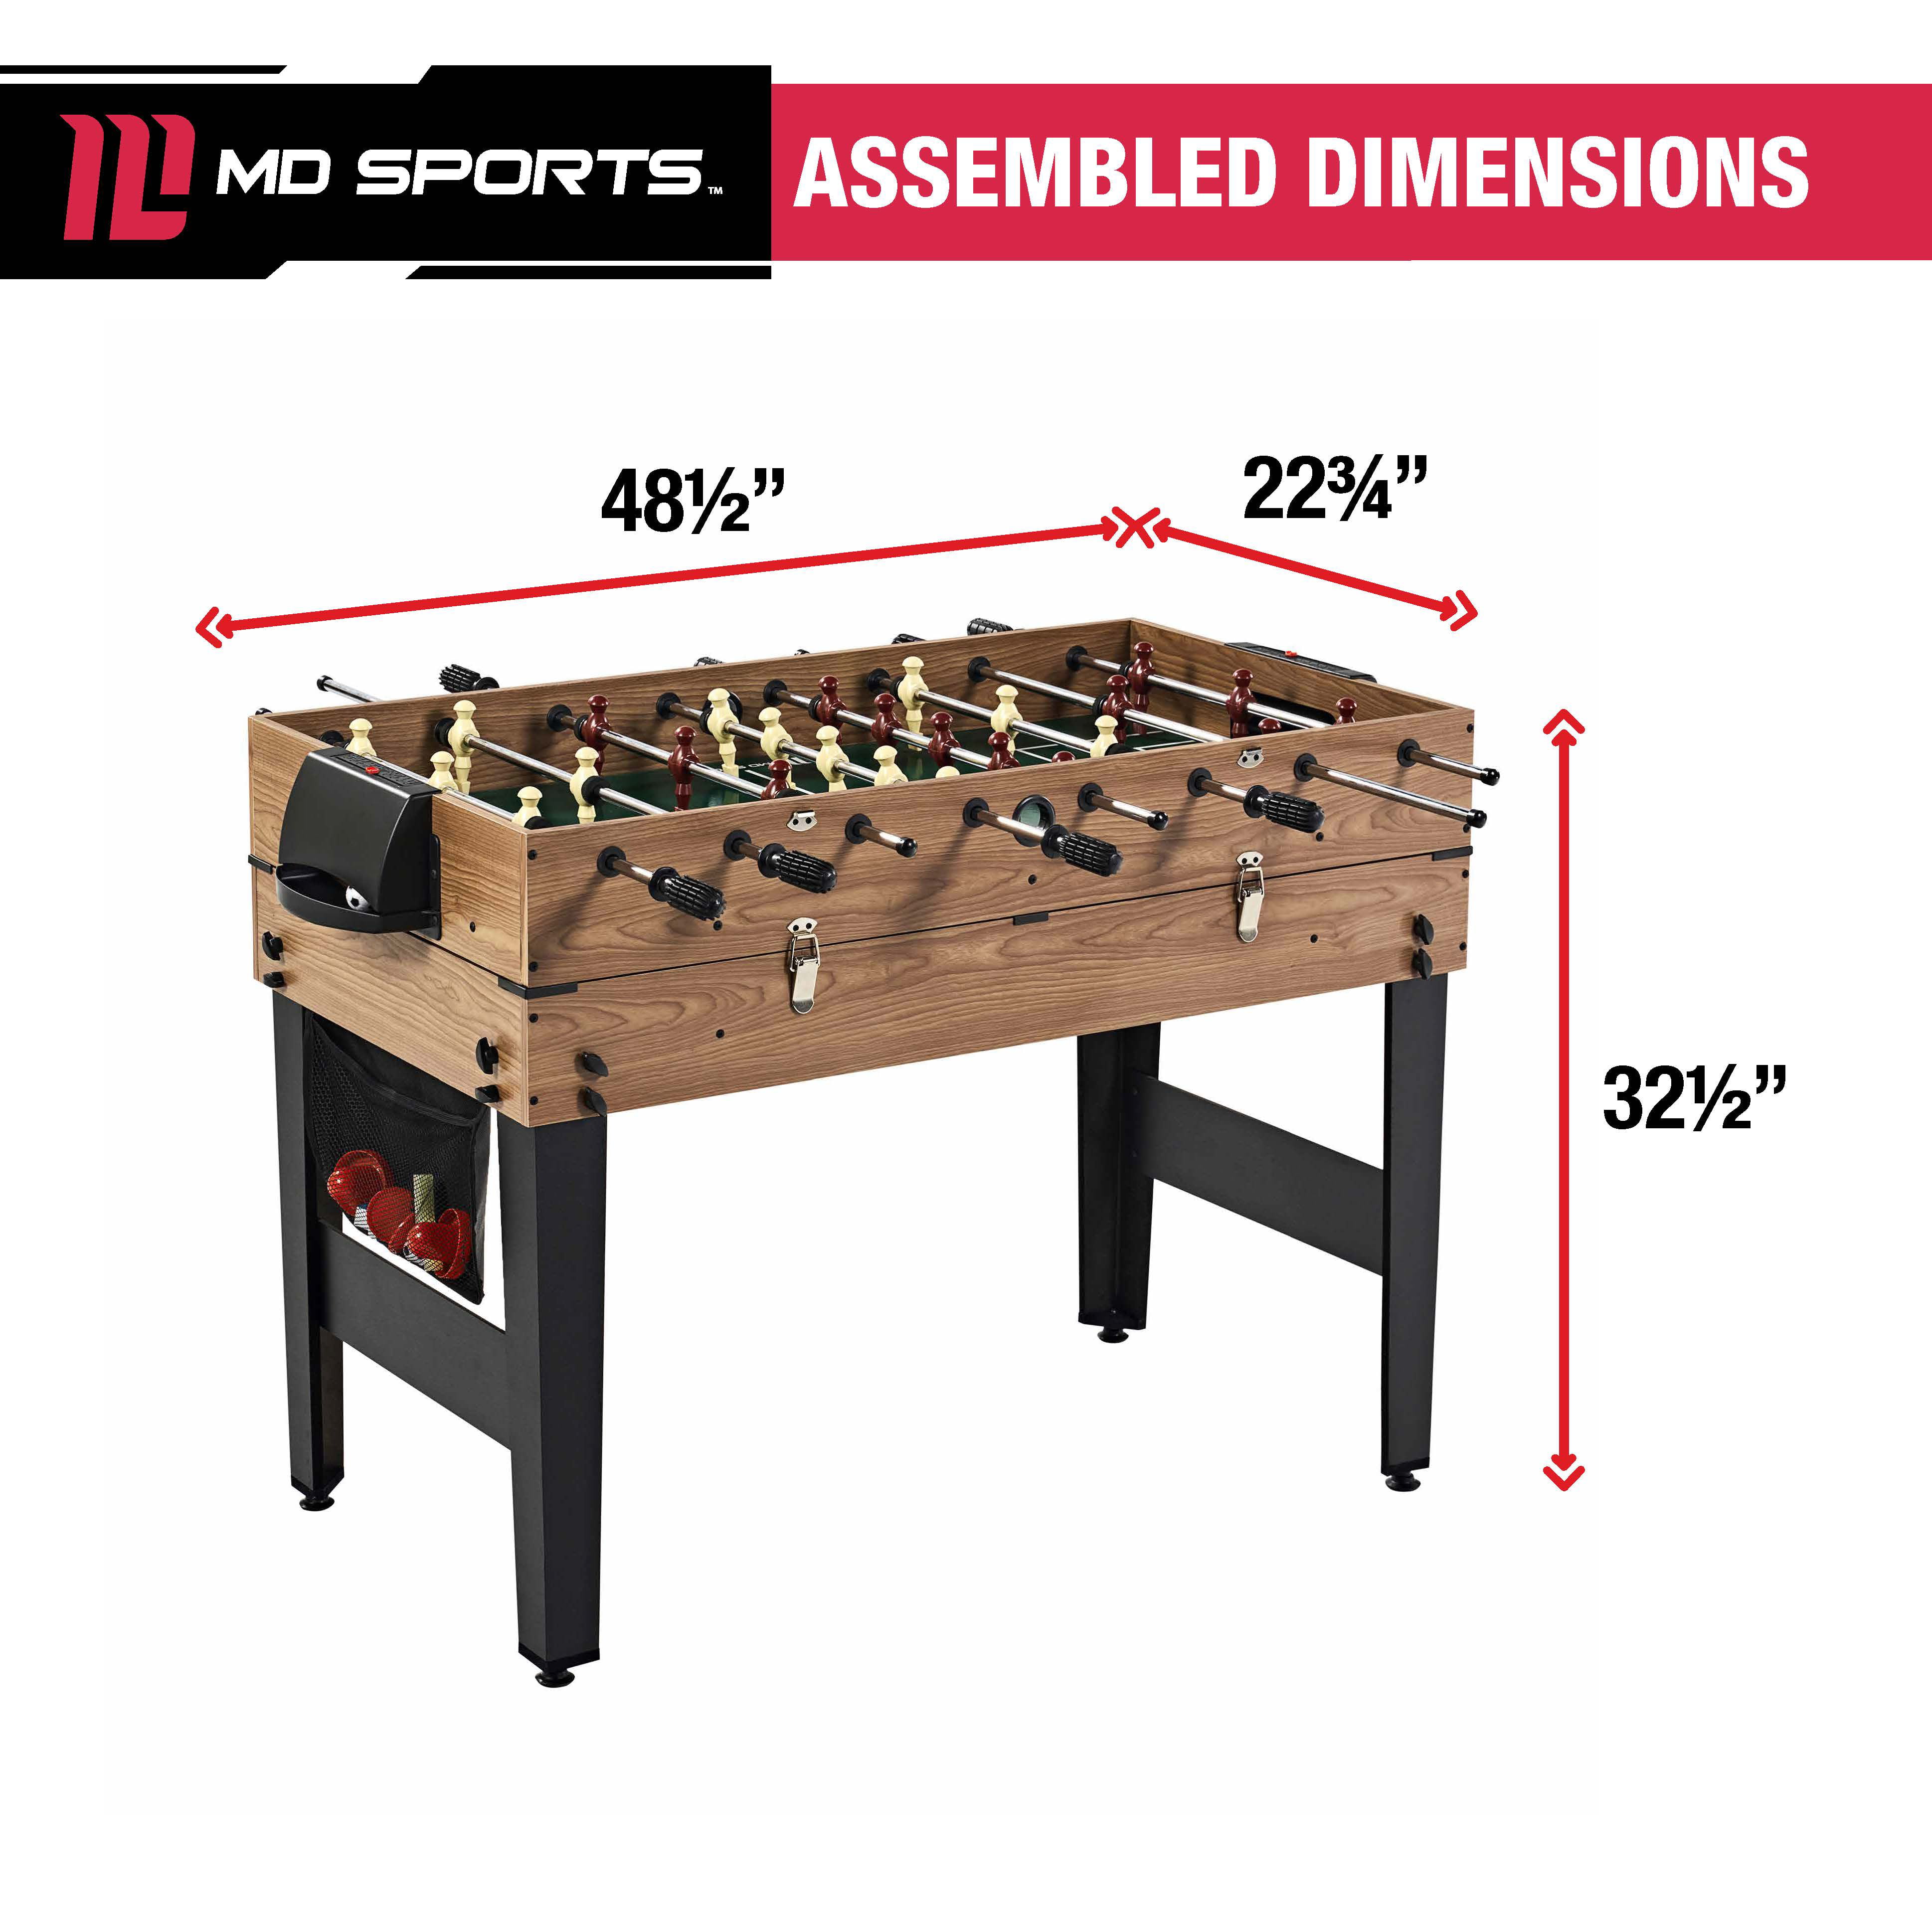 MD Sports Multi Game Table 48/"/" for sale online